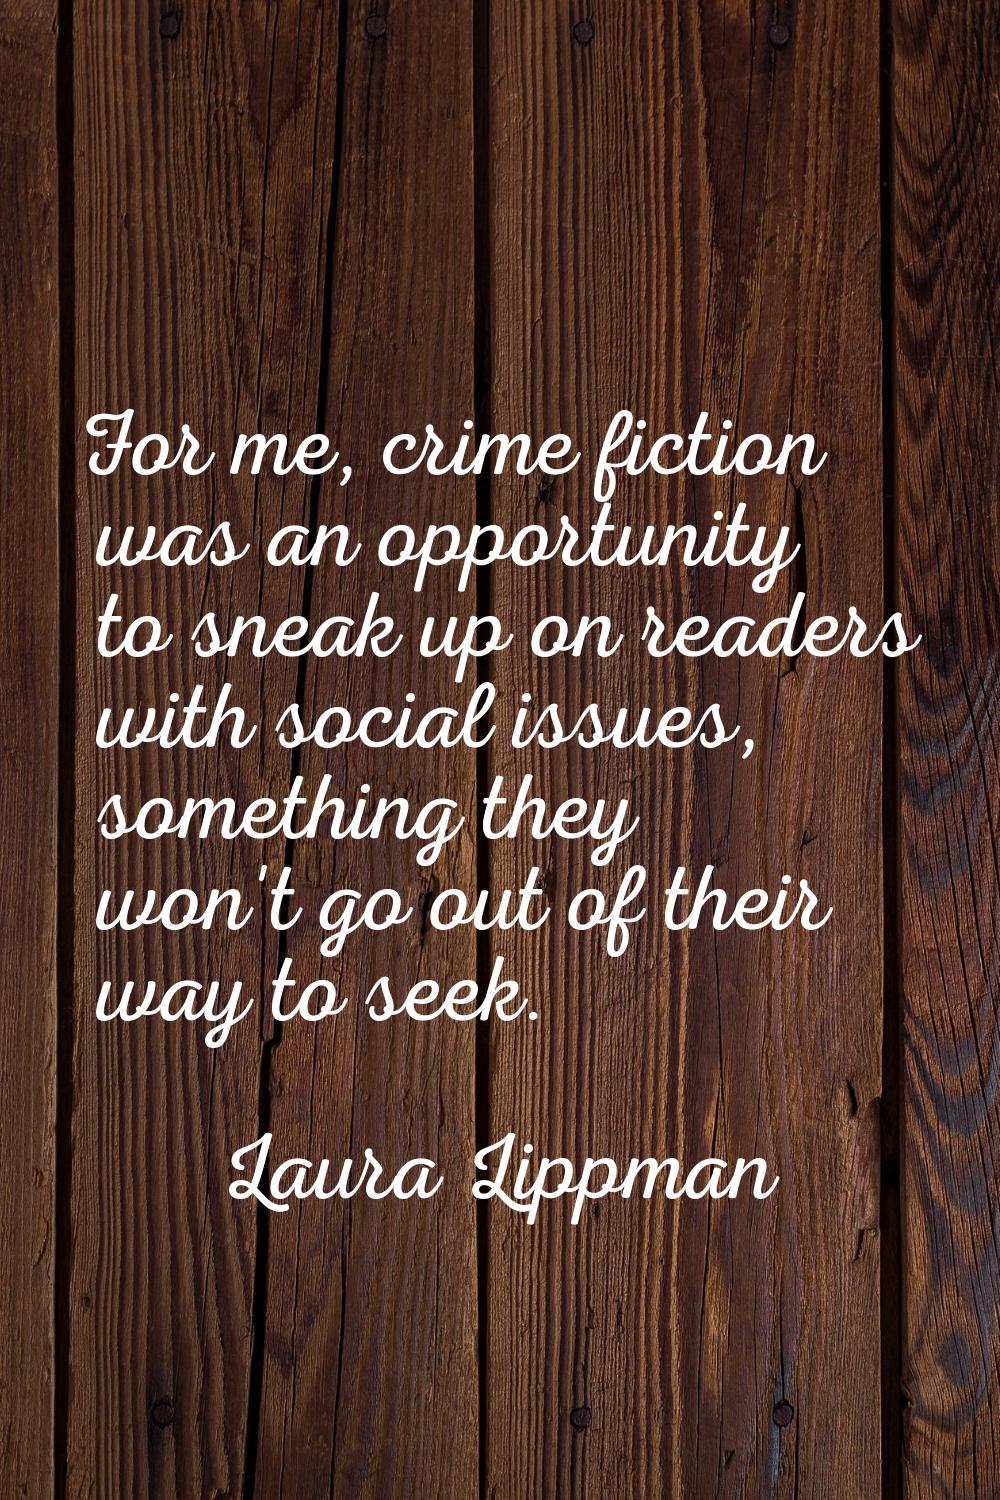 For me, crime fiction was an opportunity to sneak up on readers with social issues, something they 